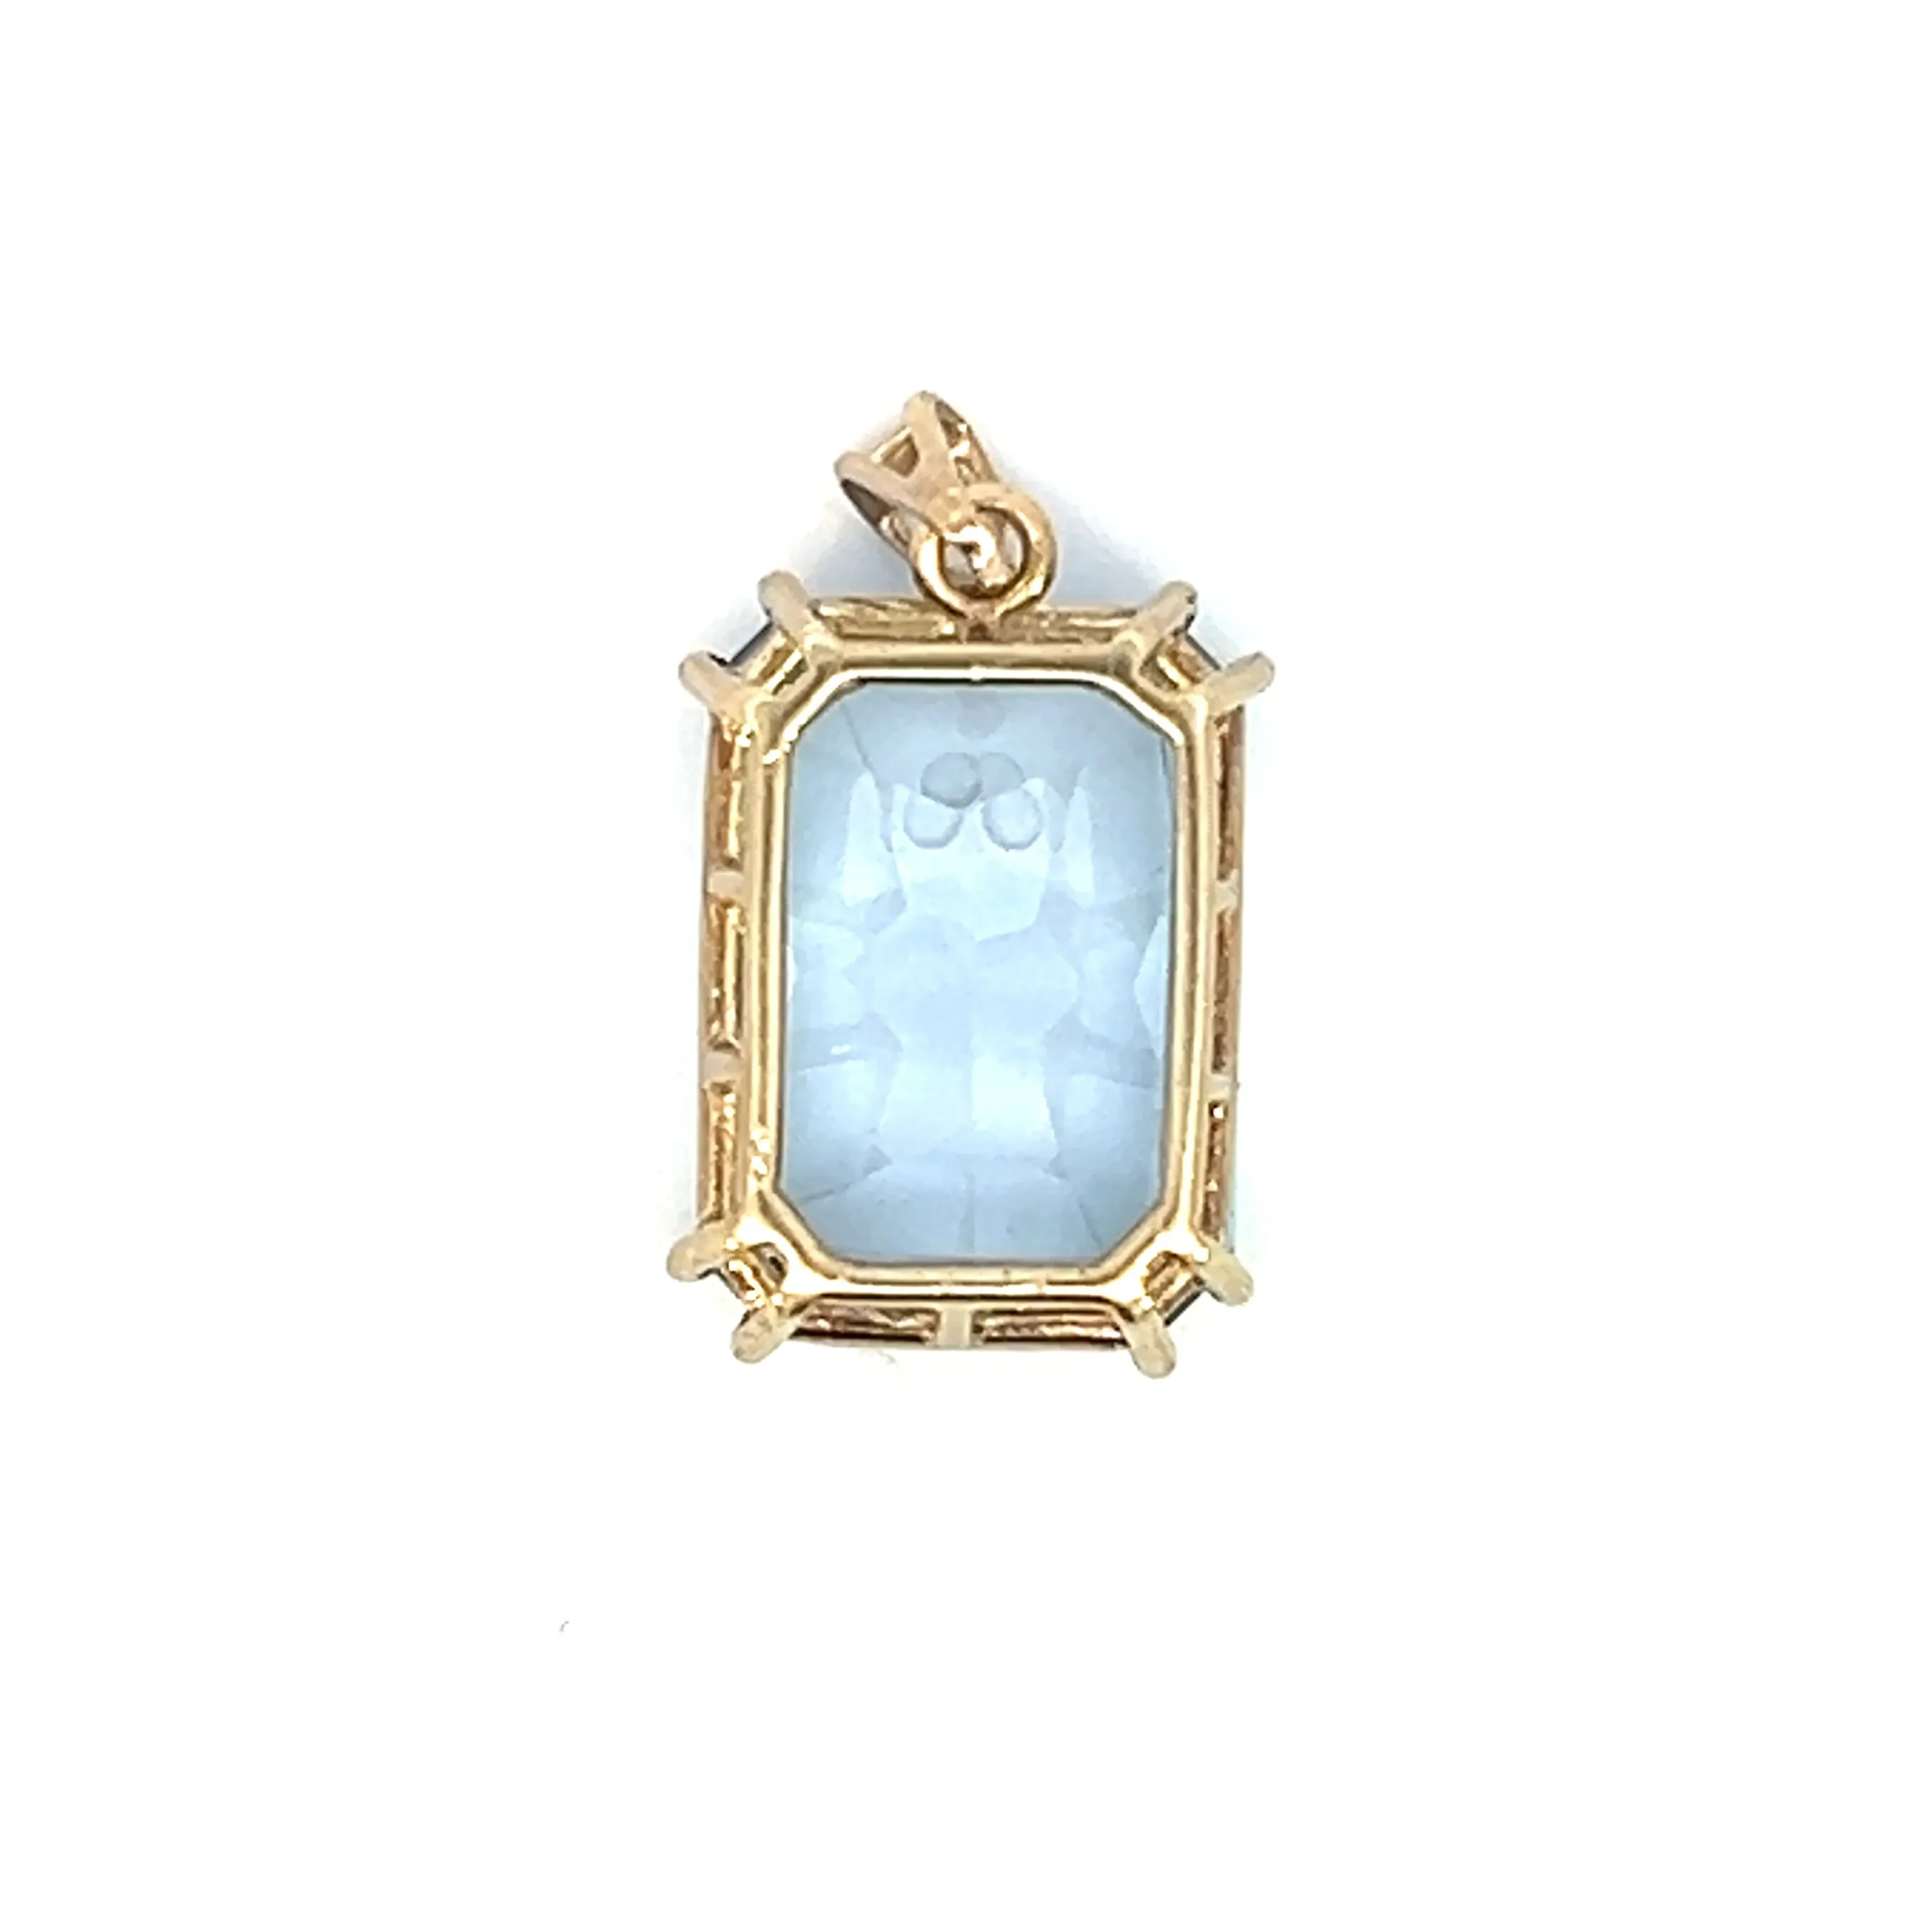 One antique estate 8 karat yellow gold pendant featuring an emerald-cut synthetic blue spinel measuring 13x18mm and weighing 16.30 carats in a double four-prong setting. The entire pendant measures 27x22mm.